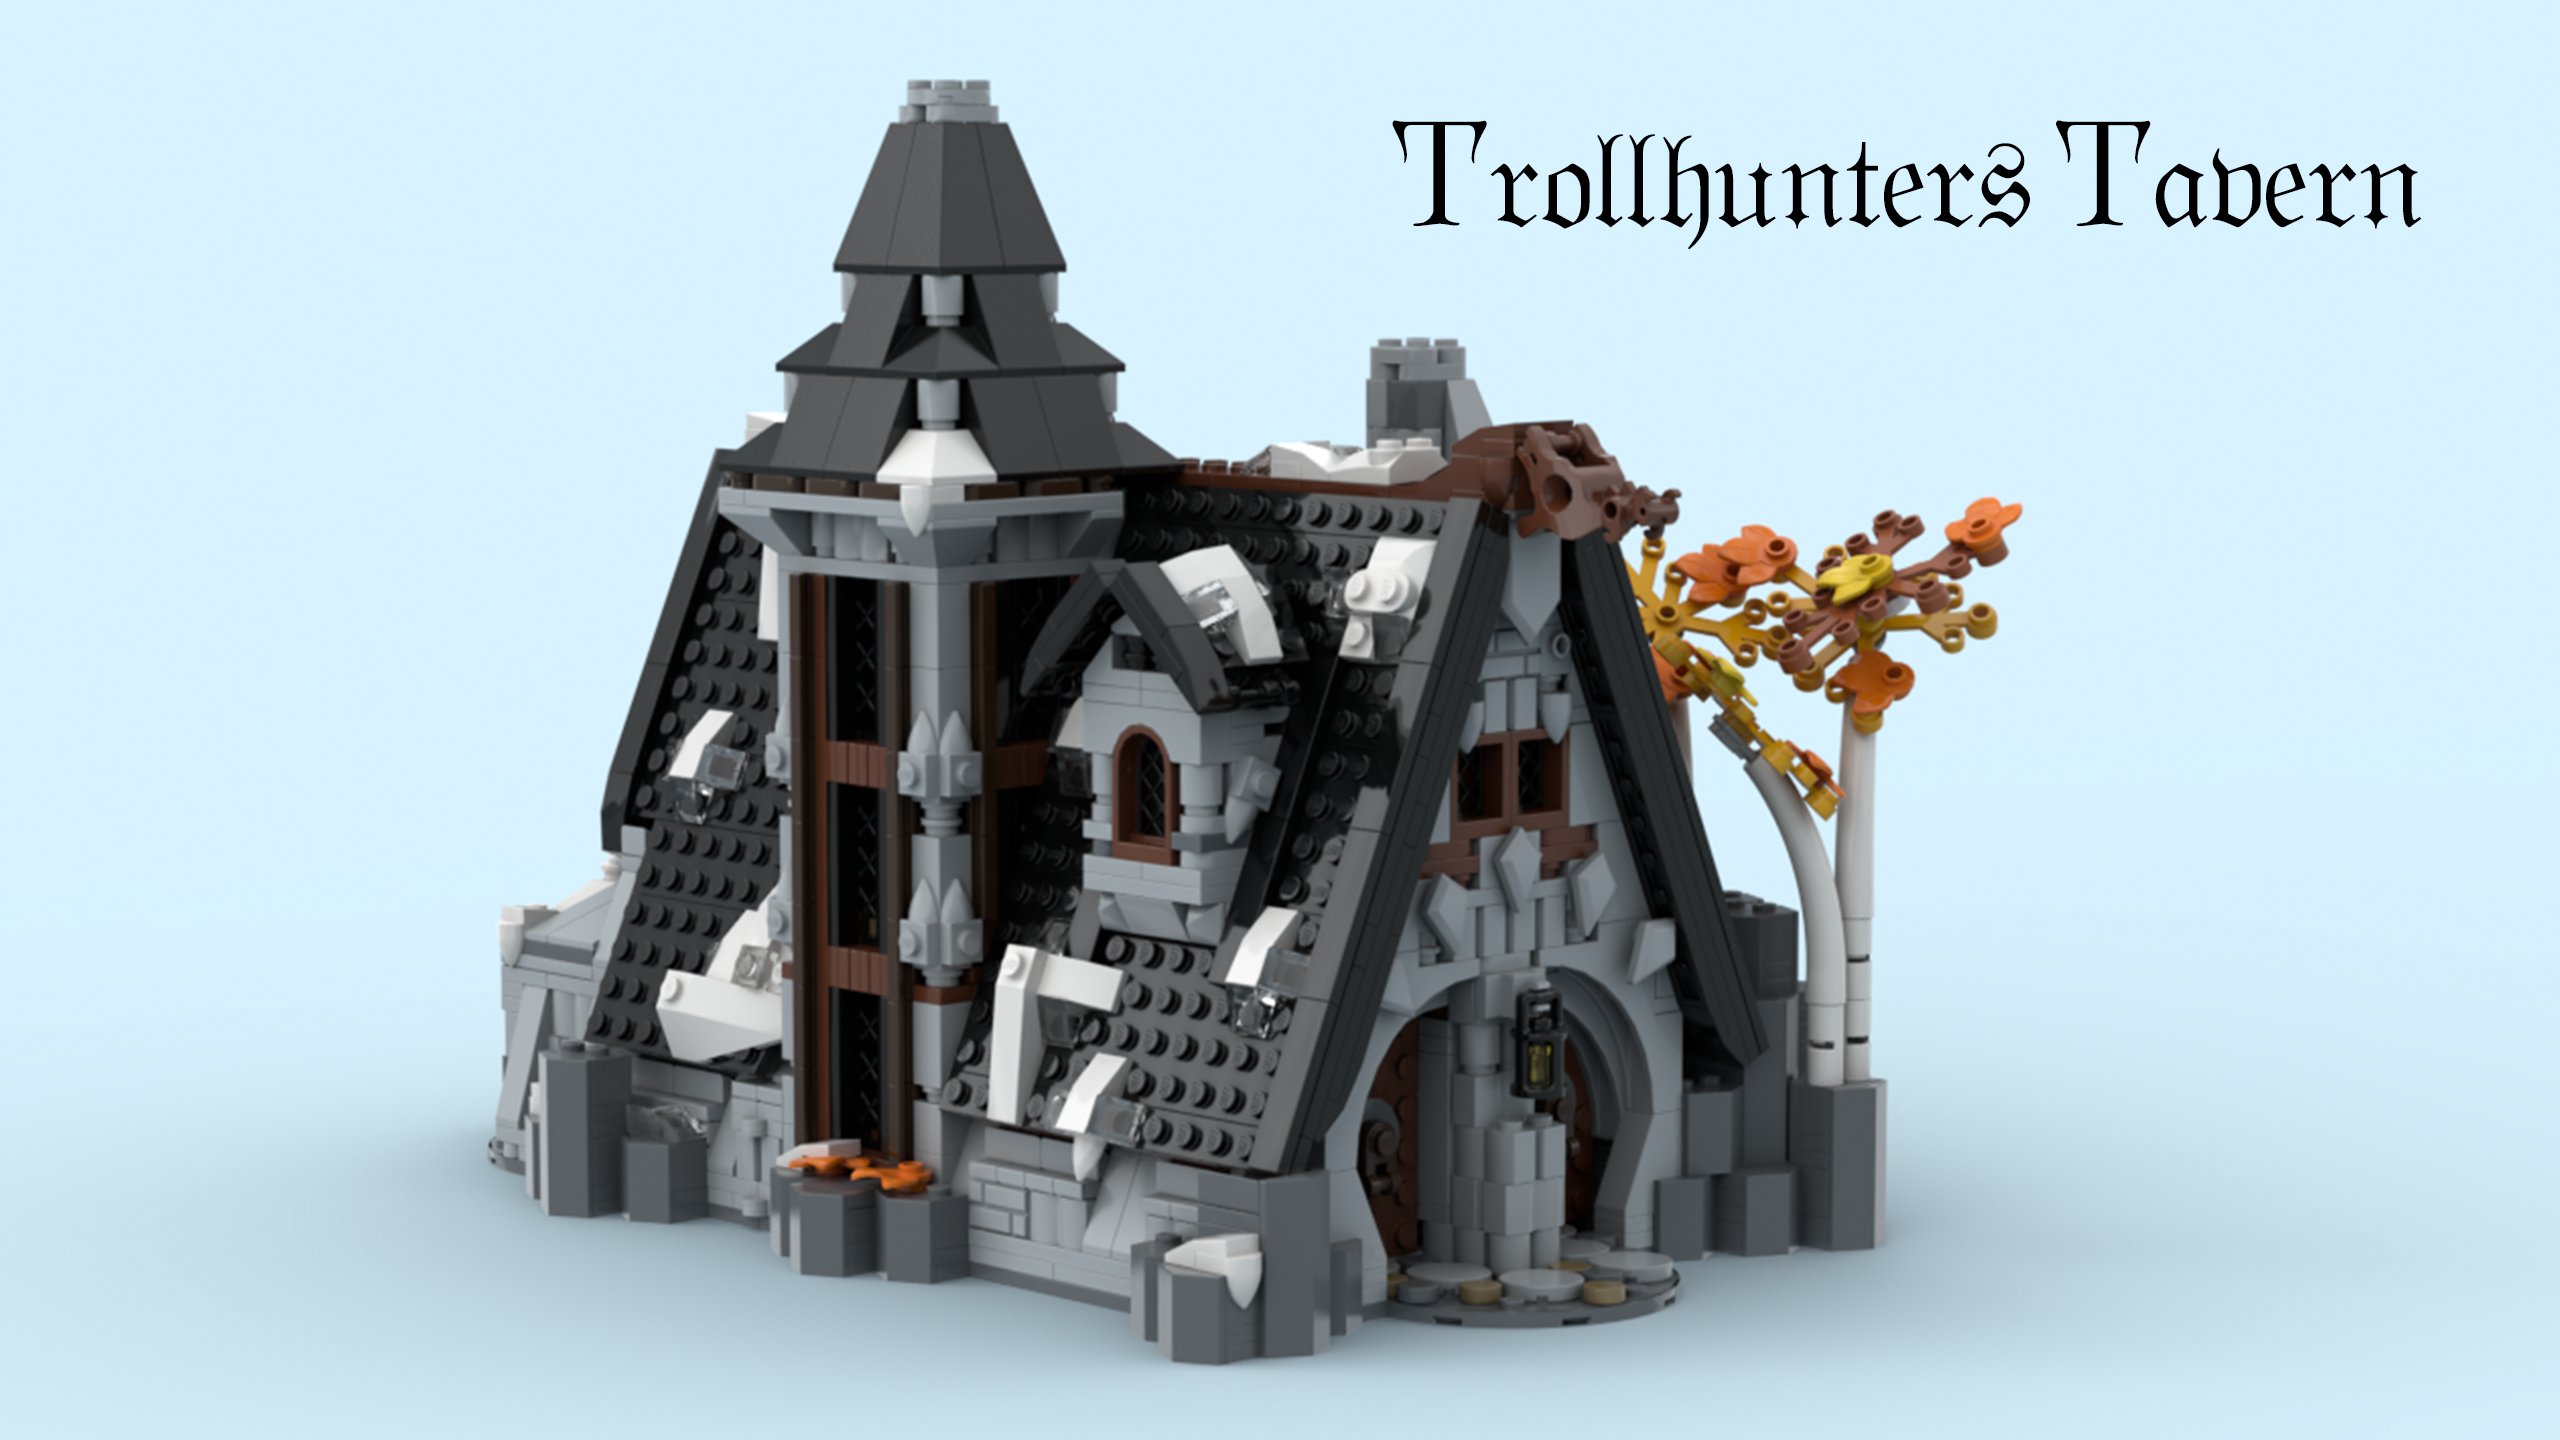 Hvor fint I mærke Tom on Twitter: "Unfortunately not accepted for LEGO Ideas, but still  wanted to present it: Inspired by Klugheim and Skyrim, I built this tavern  amidst basalt rocks. https://t.co/qEpvt3PKNW" / Twitter